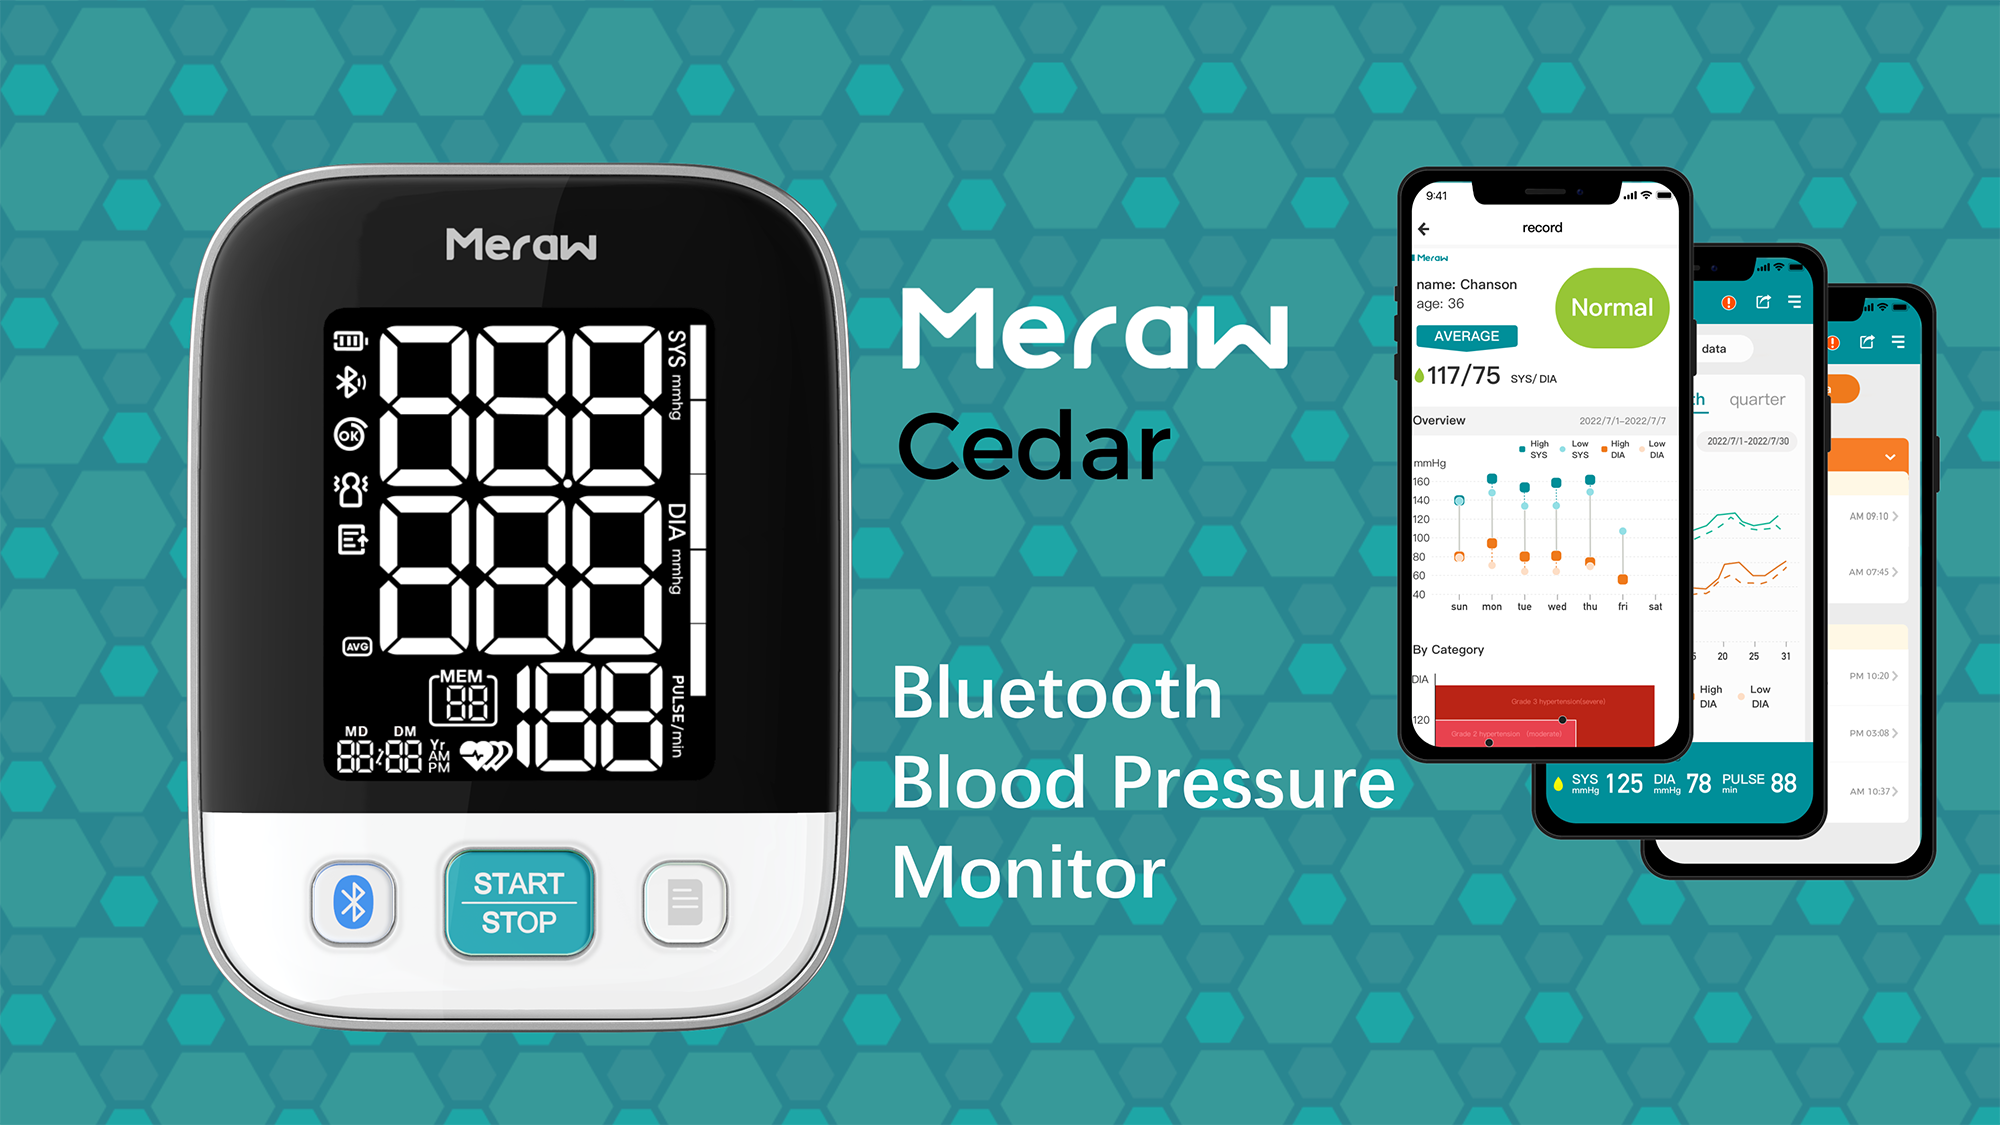 Meraw Digital Home Blood Pressure Monitor, Blood Pressure Monitor Accurate  Home, Blood Pressure Cuff Automatic Arm 8.7-16.5 Dual Users All in One